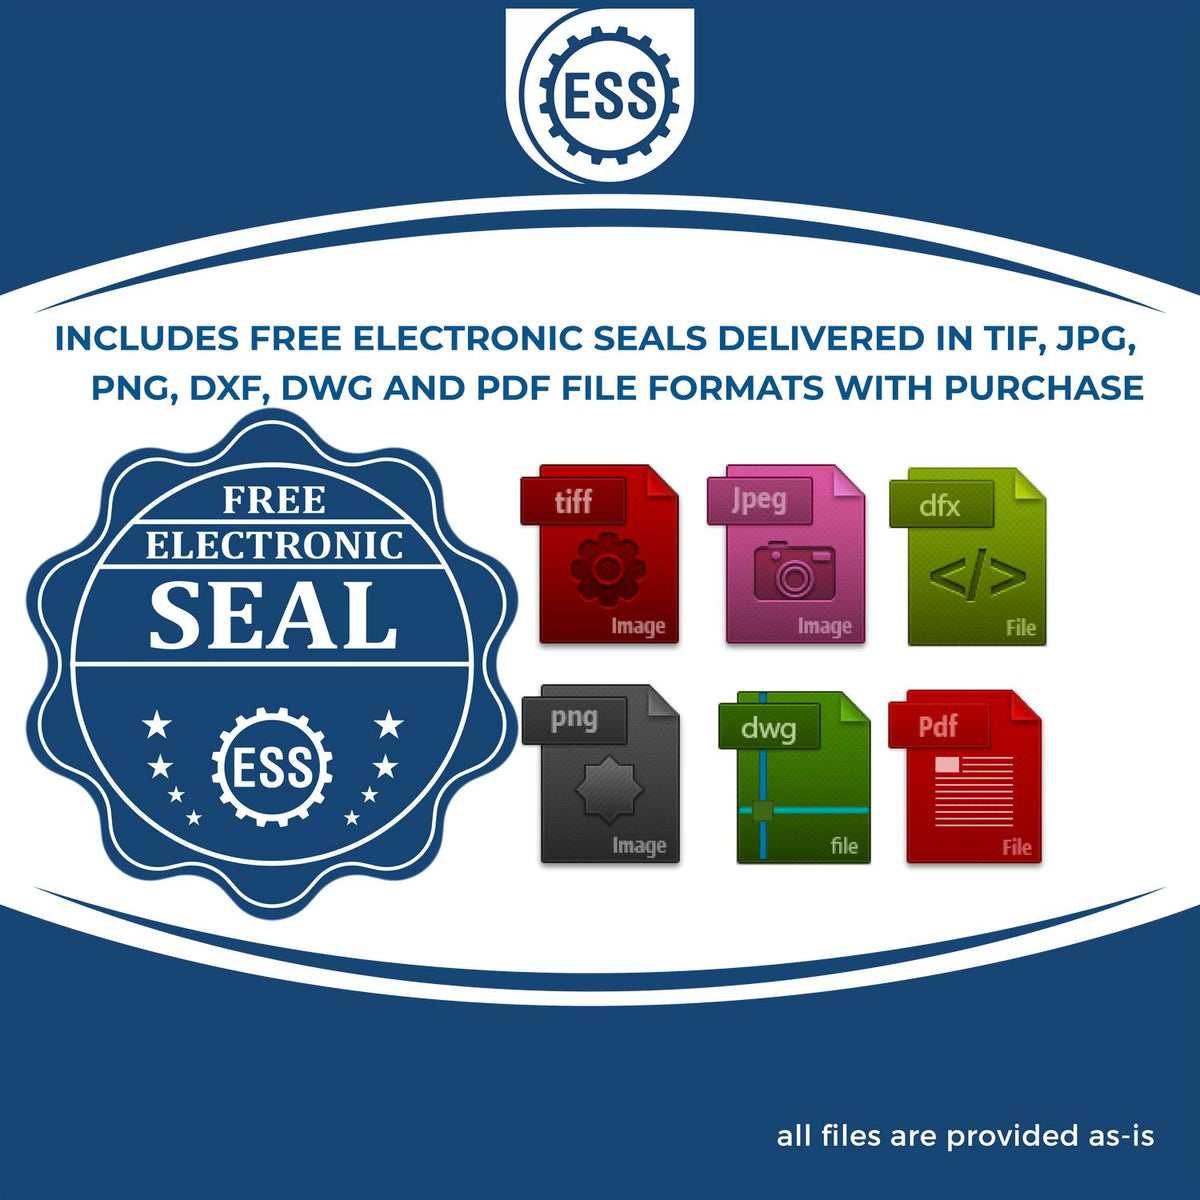 An infographic for the free electronic seal for the MaxLight Premium Pre-Inked Connecticut State Seal Notarial Stamp illustrating the different file type icons such as DXF, DWG, TIF, JPG and PNG.